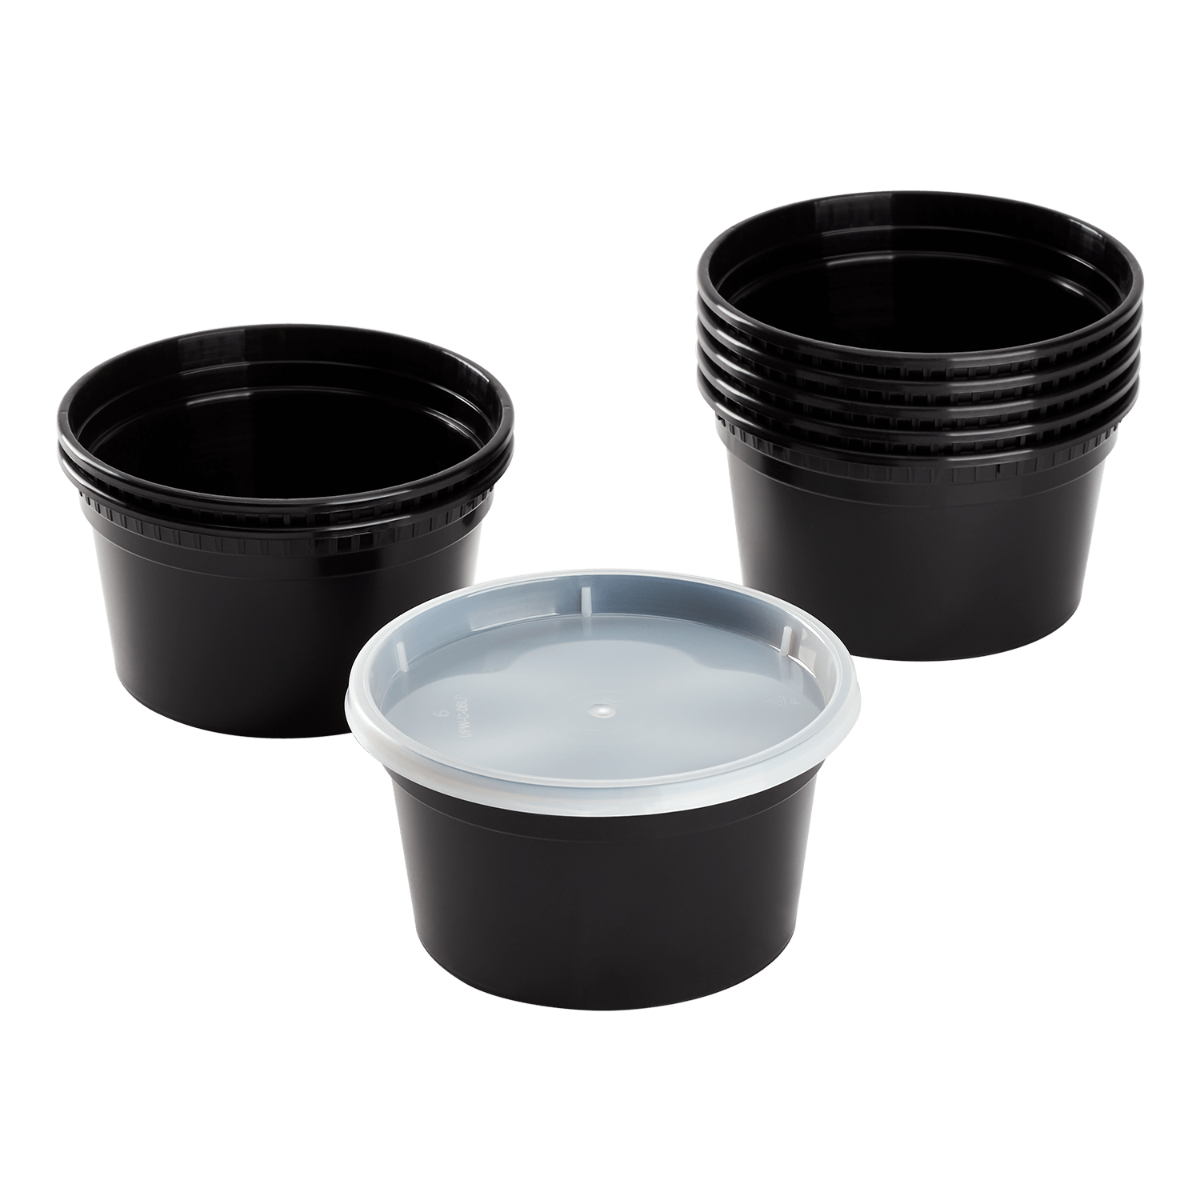 Deli Containers with Lids - 8 oz., 240 Containers/Lids